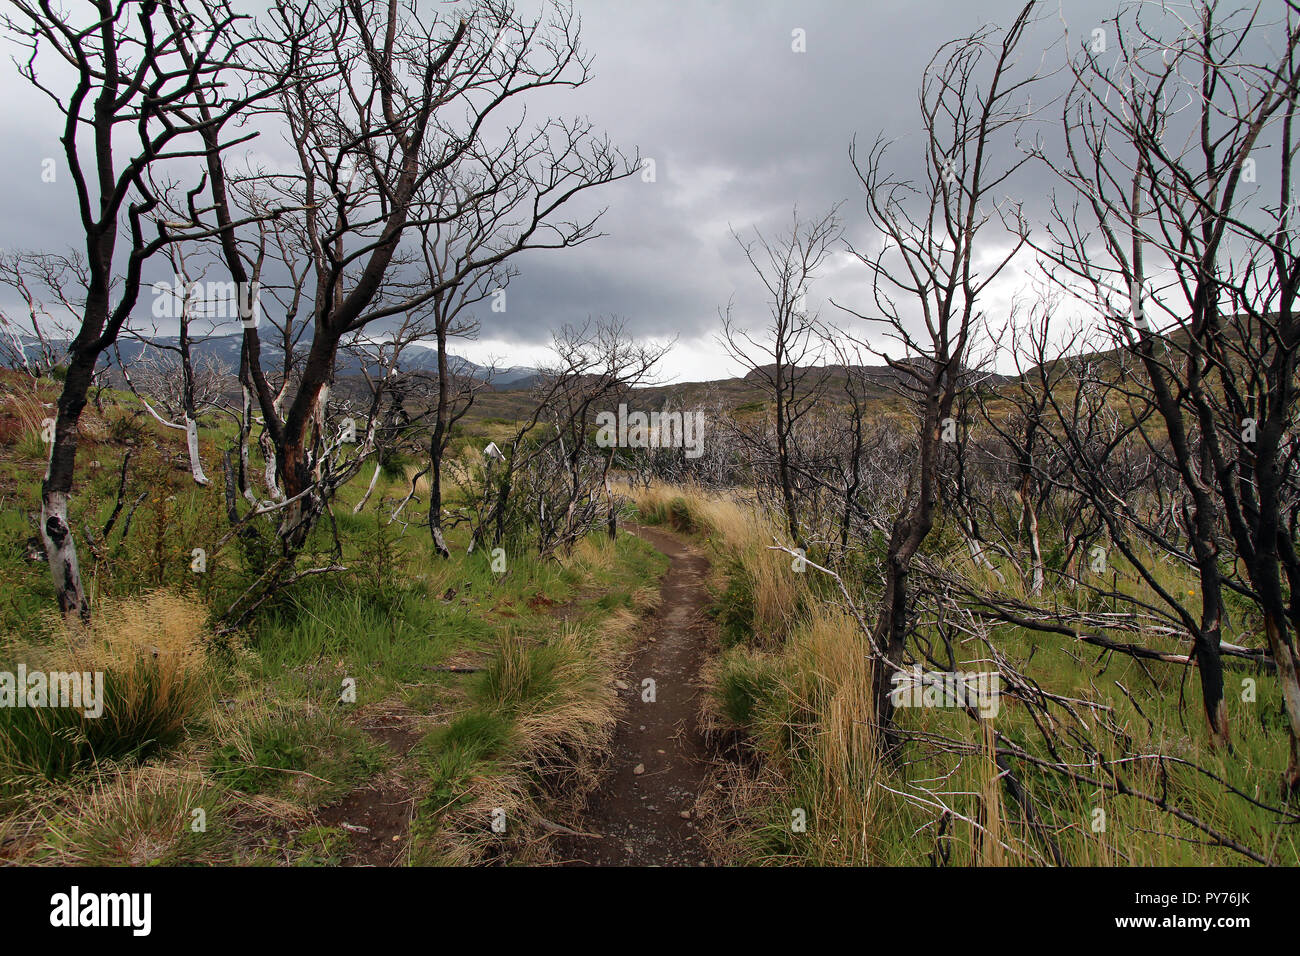 Fire-ravaged forest in Torres del Paine National Park, Chile Stock Photo